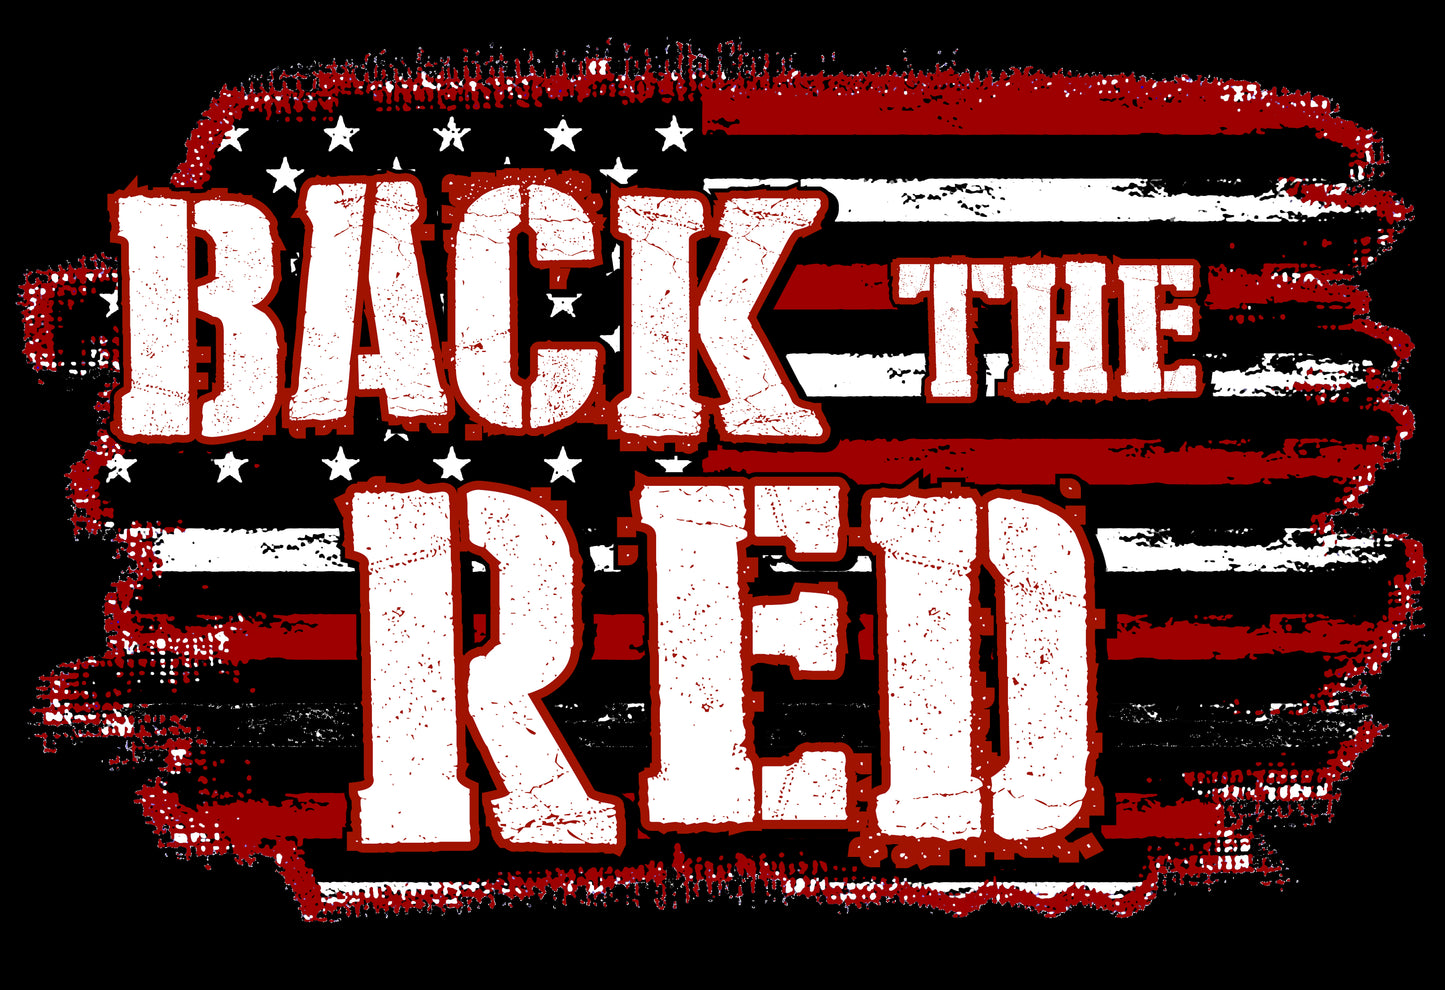 Back the Red Distressed Flag